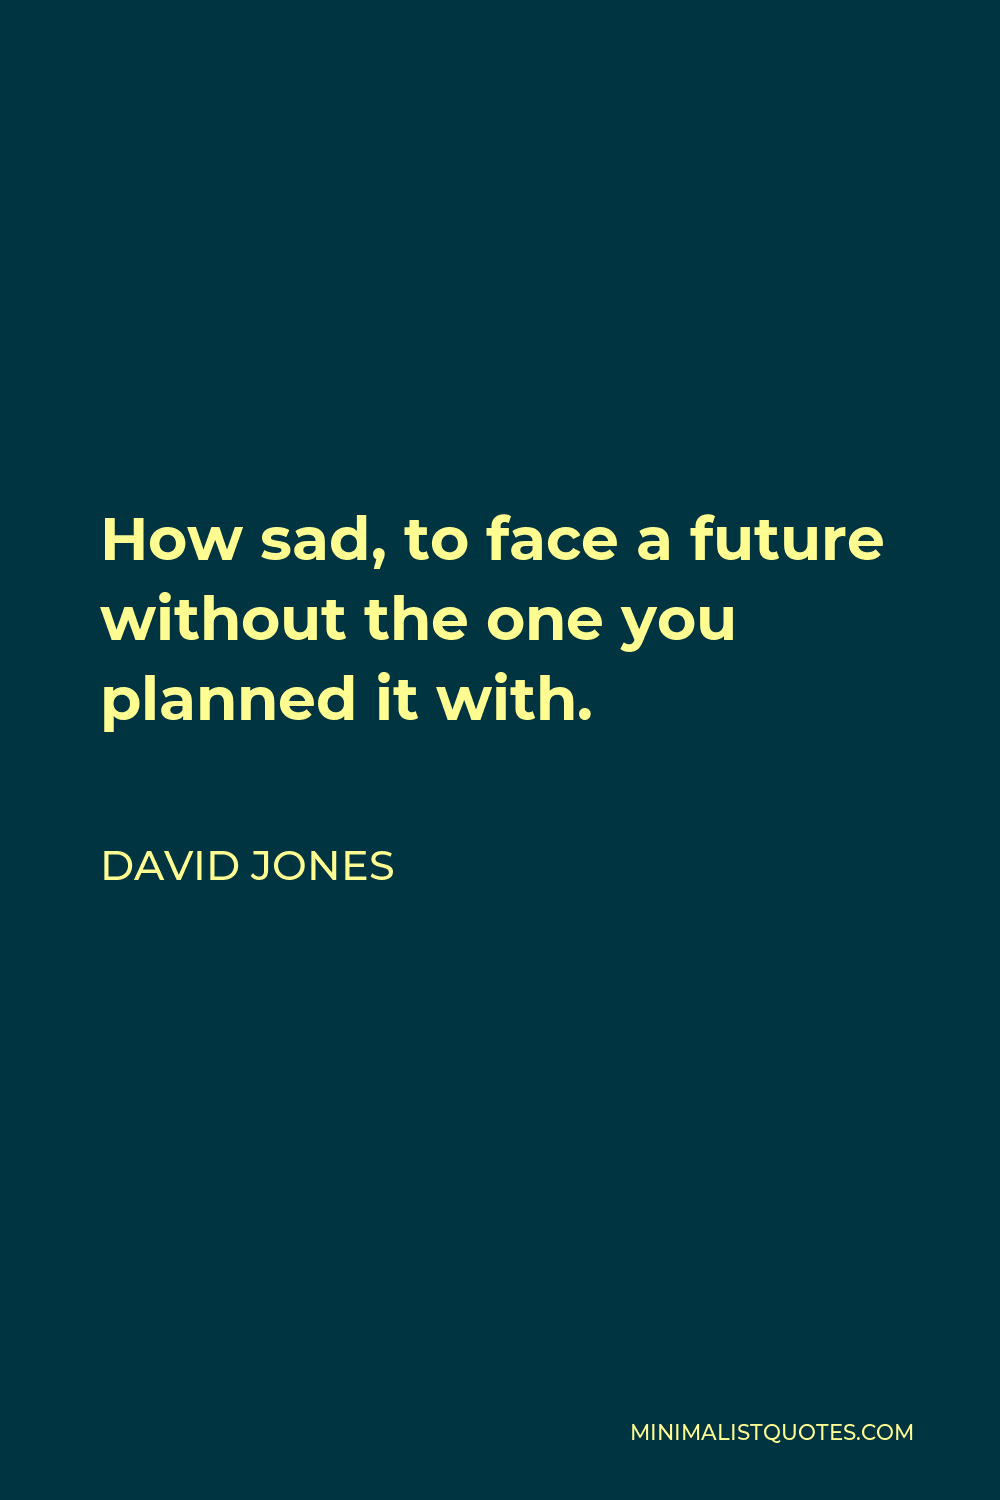 David Jones Quote - How sad, to face a future without the one you planned it with.